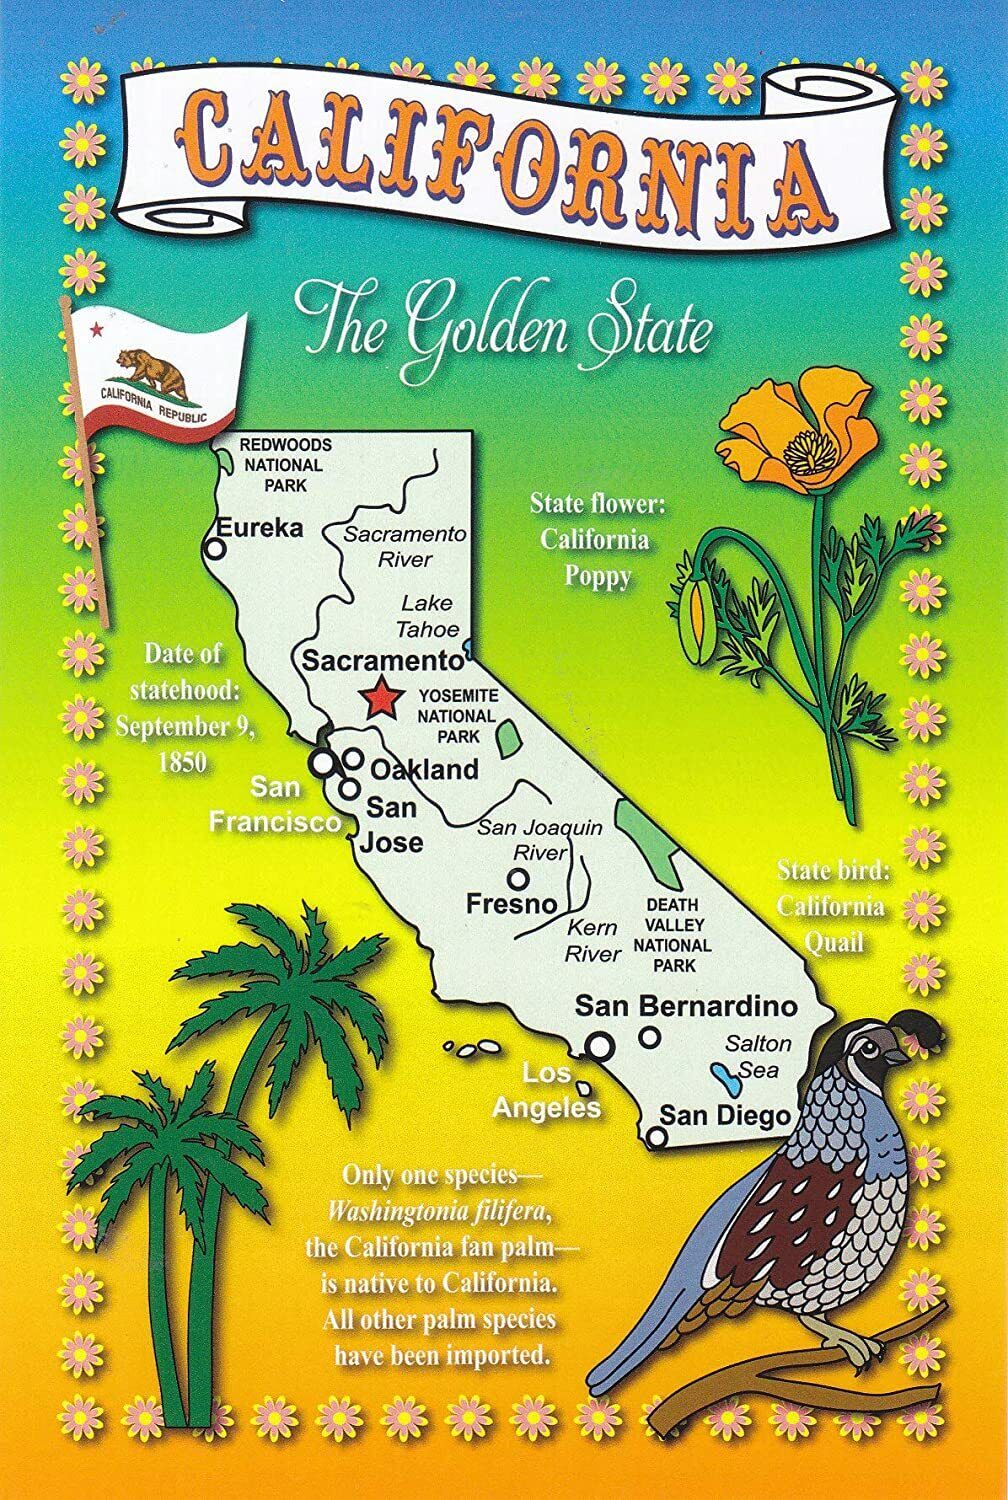 STATES9CAL CALIFORNIA The Golden State; Statehood: 09/  .. from HibiscusExpress 